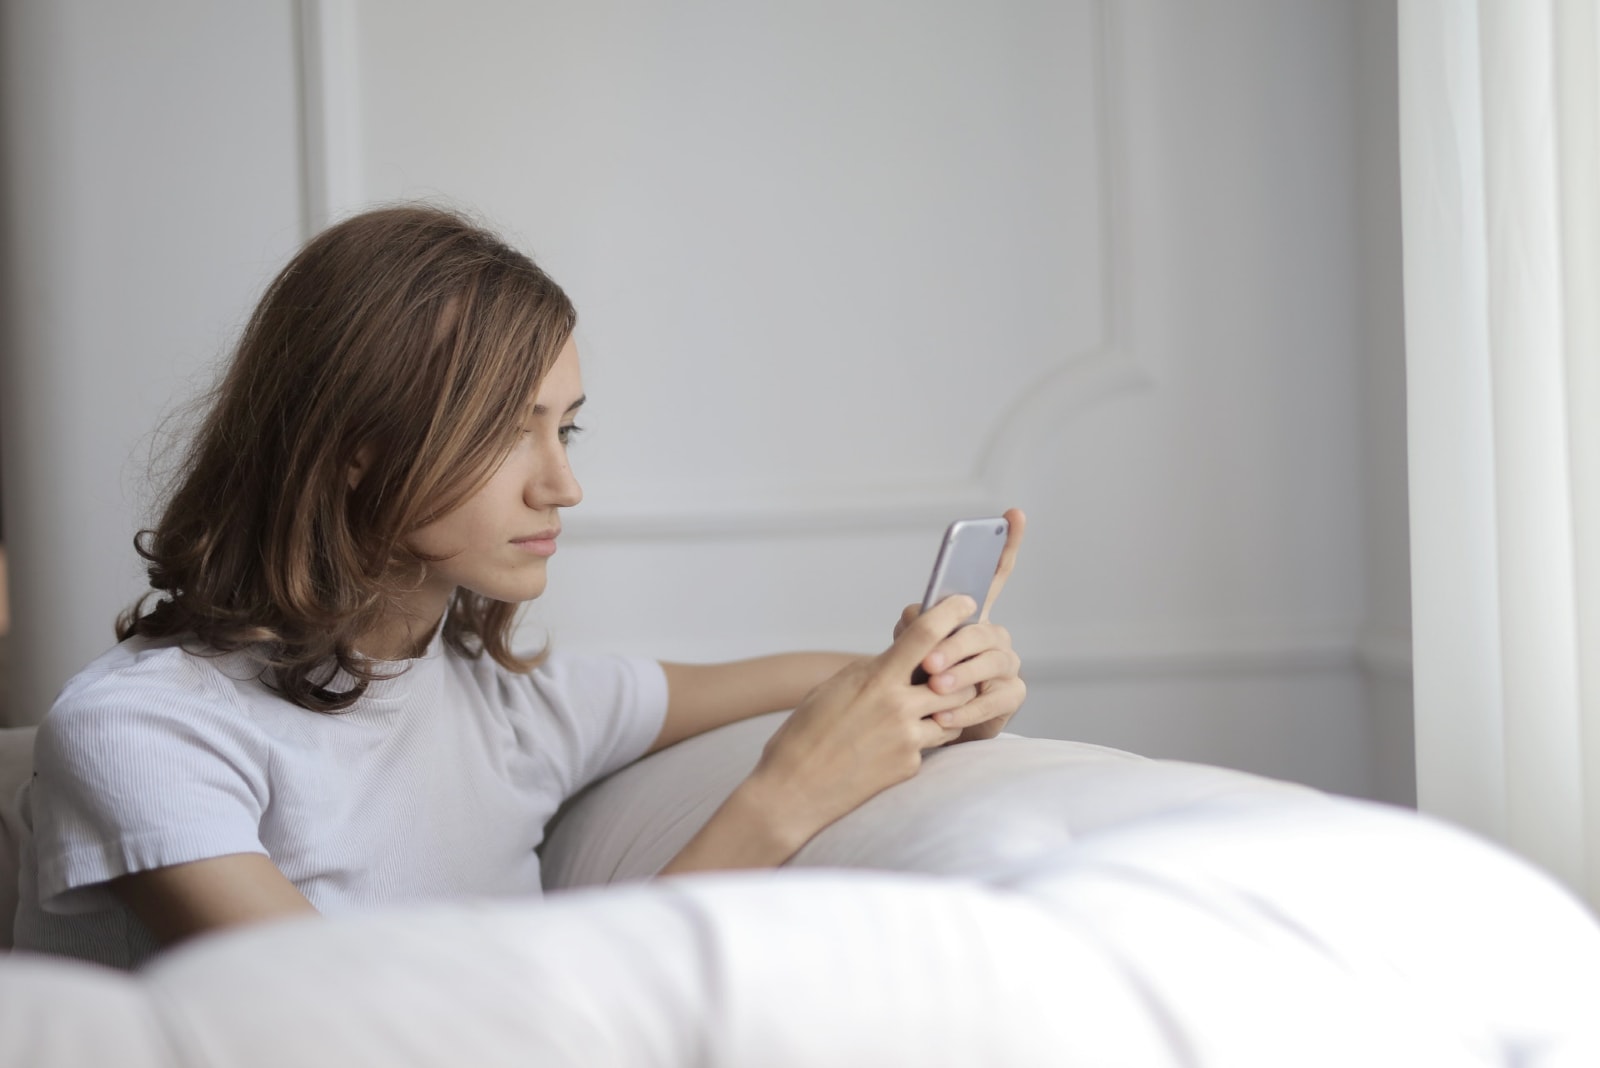 11 Toxic Texts We’ve All Received Or Sent (And What They Actually Mean)